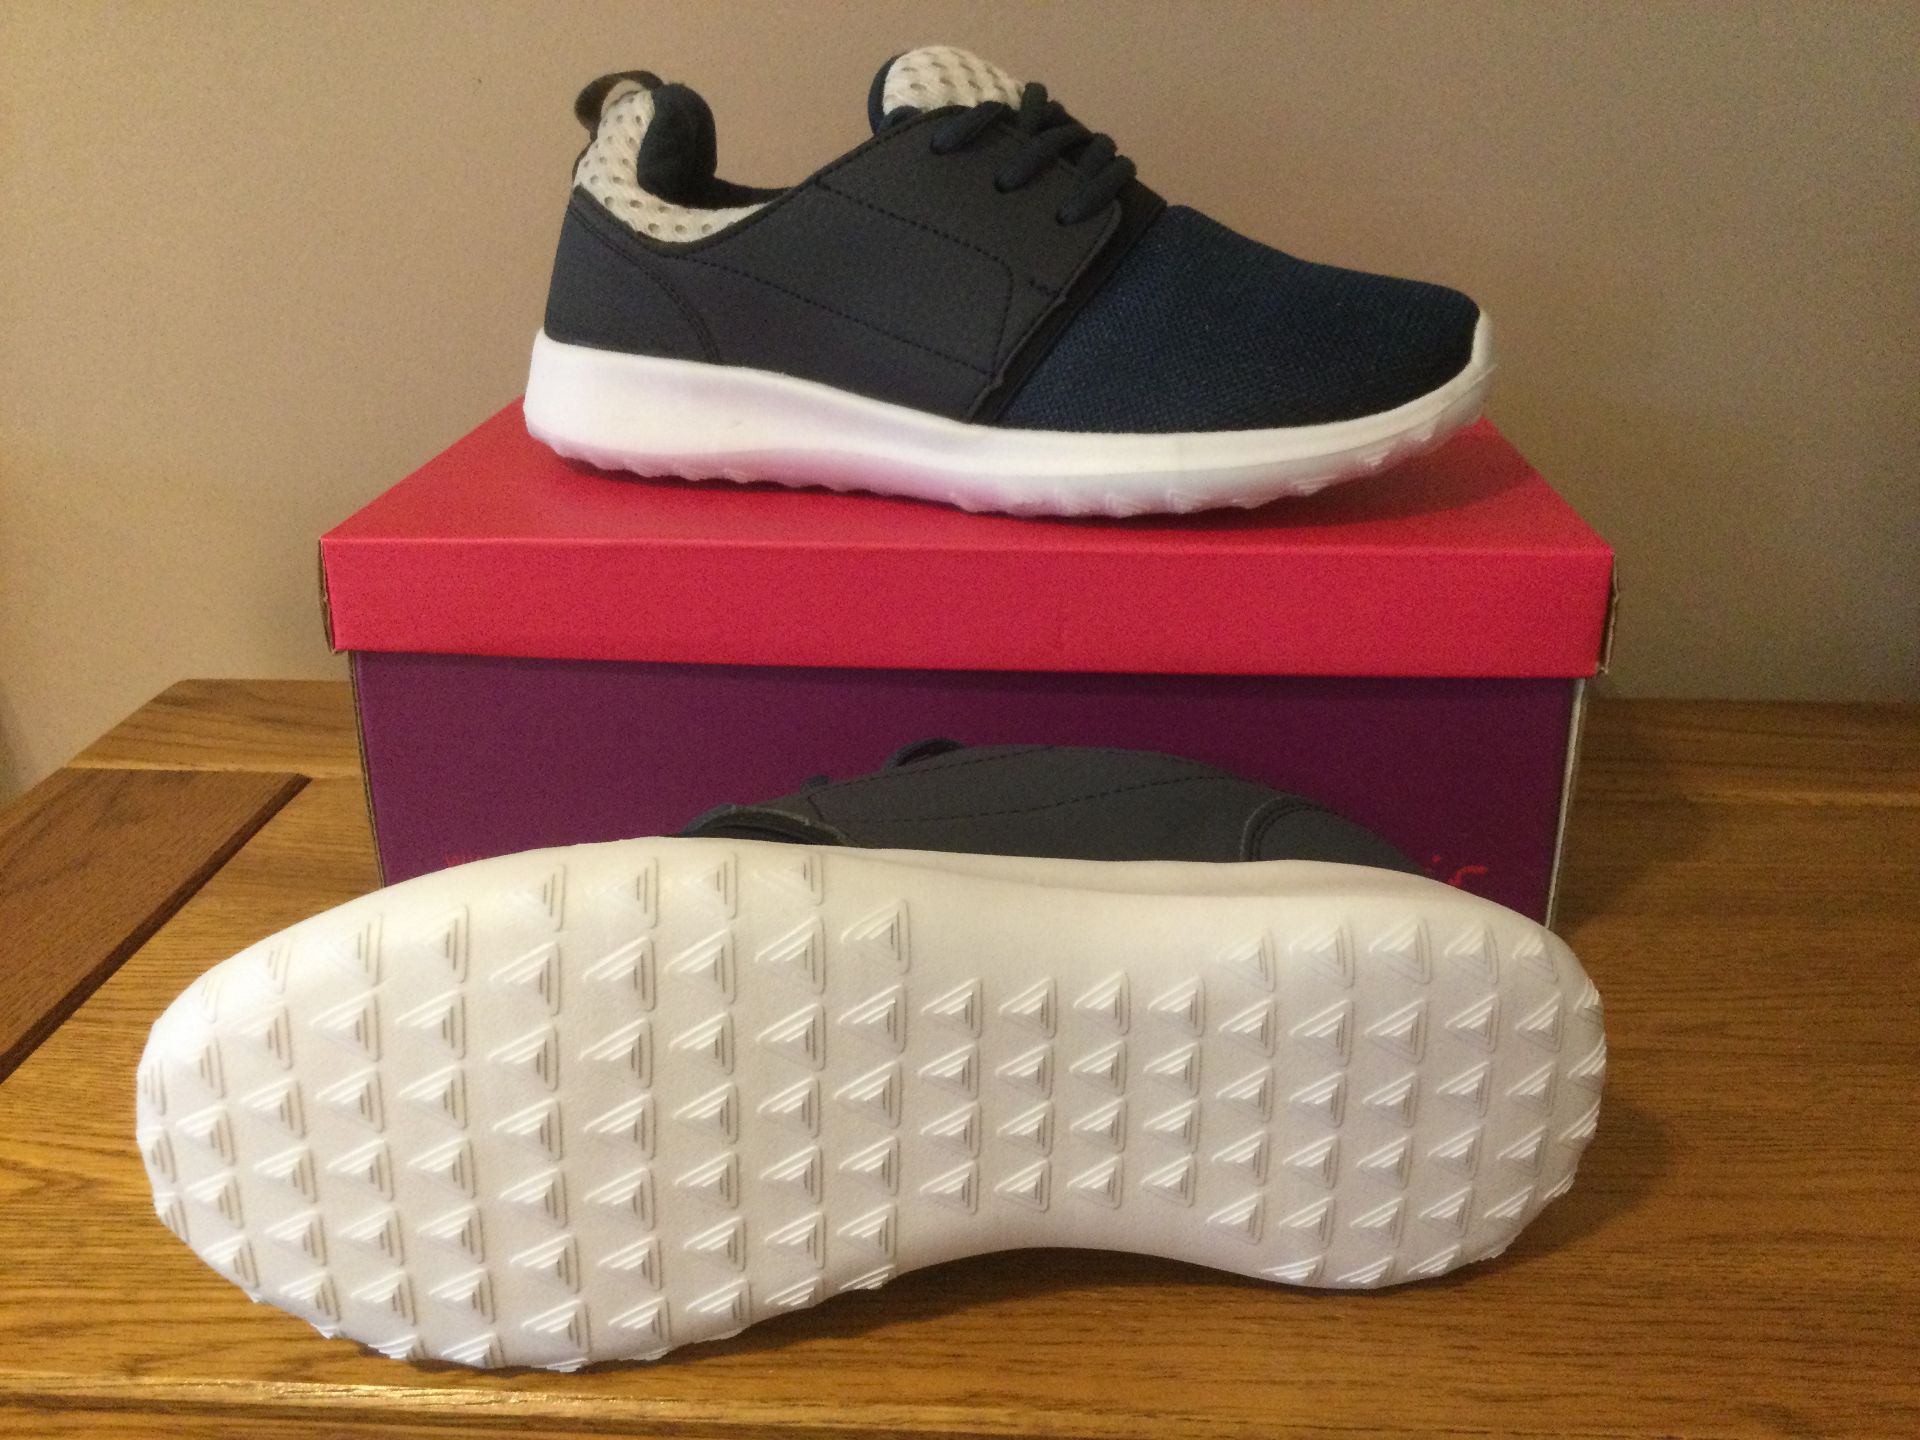 Dolcis “Rene” Women’s Memory Foam Trainers, Size 5, Navy - New RRP £28.99 - Image 4 of 5